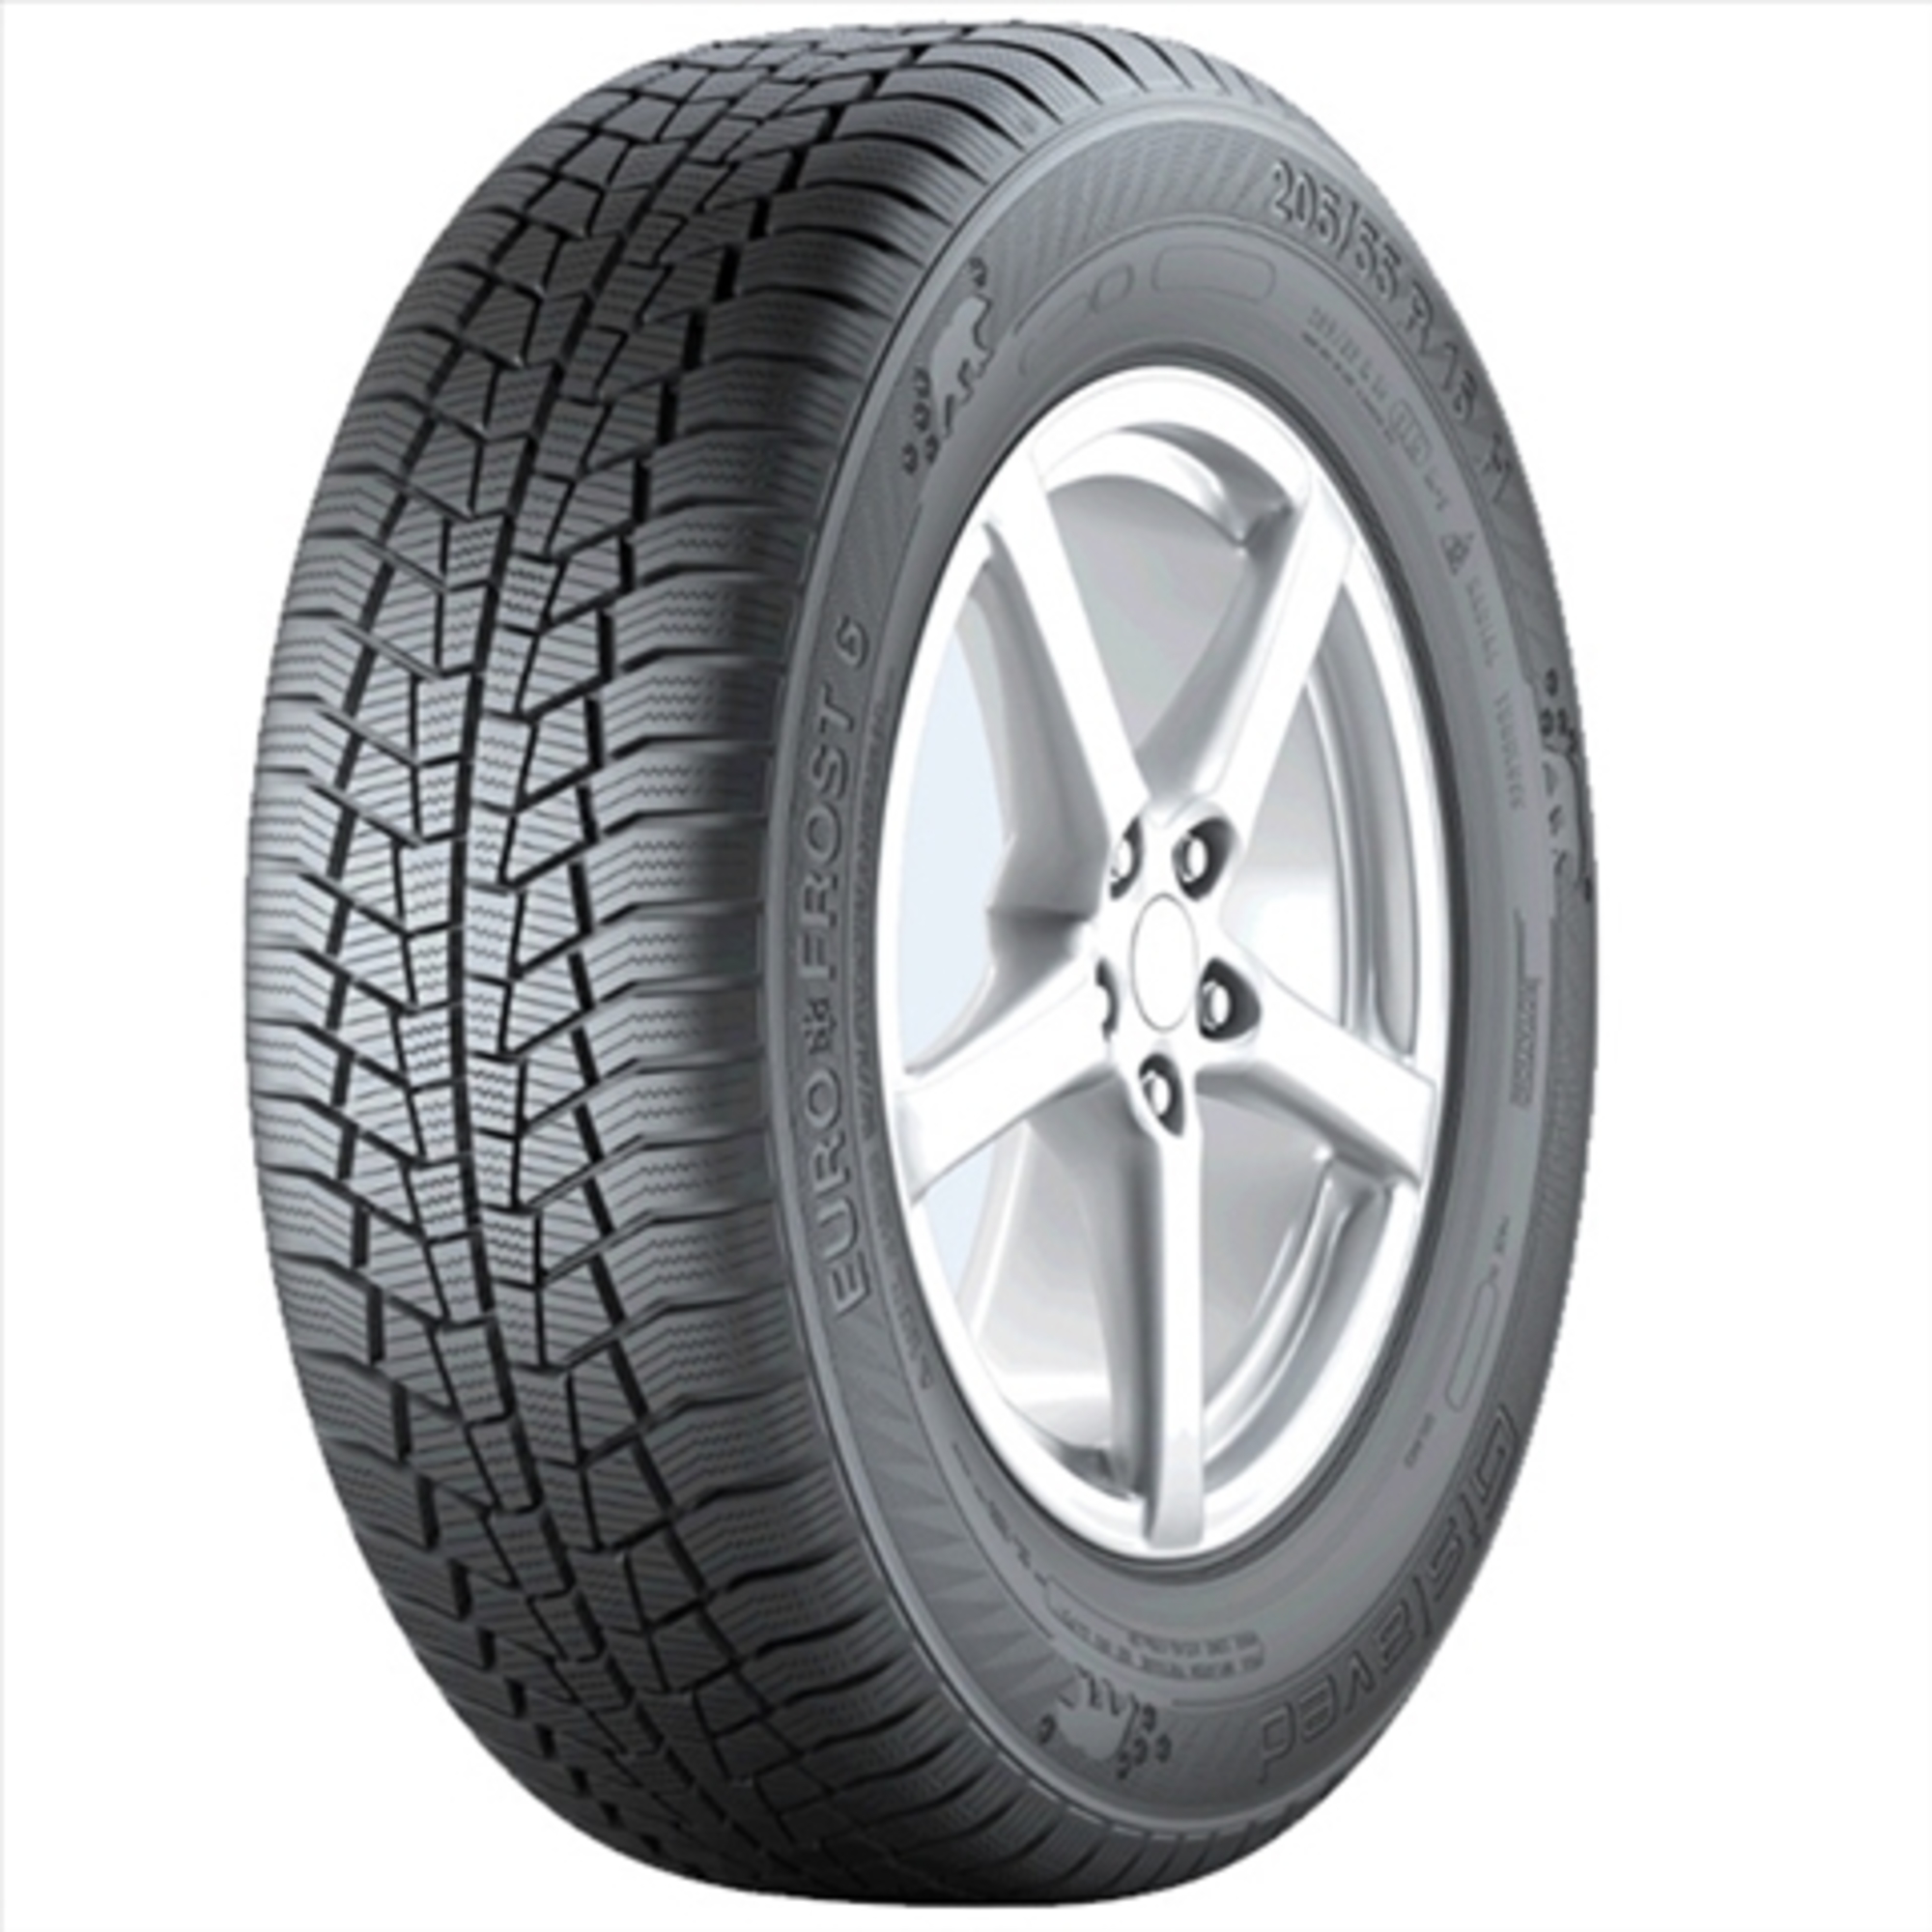 185/65r14 86t euro*frost 6 A03434940000CO GISLAVED